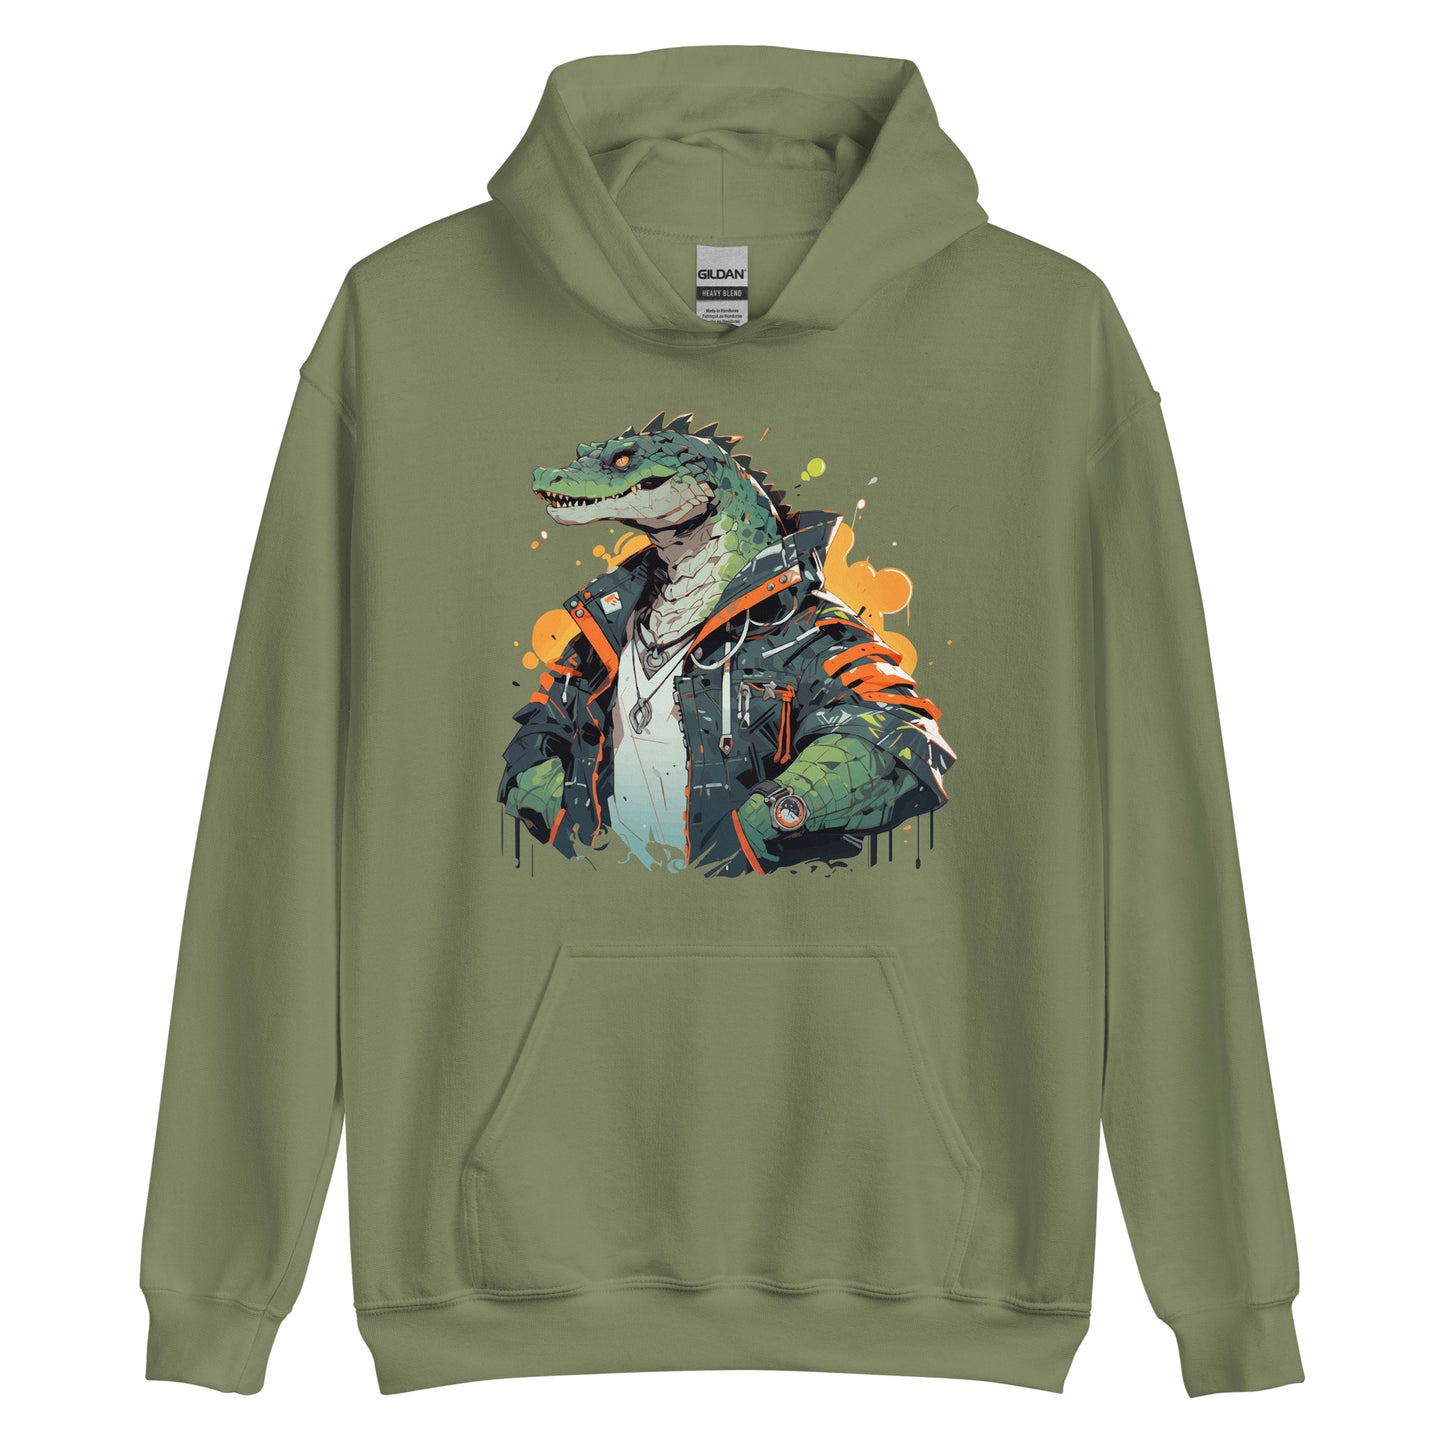 Crocodile DJ and jungle music, Croc stylish, Most angry reptile in district, Hip hop alligator rap - Unisex Hoodie